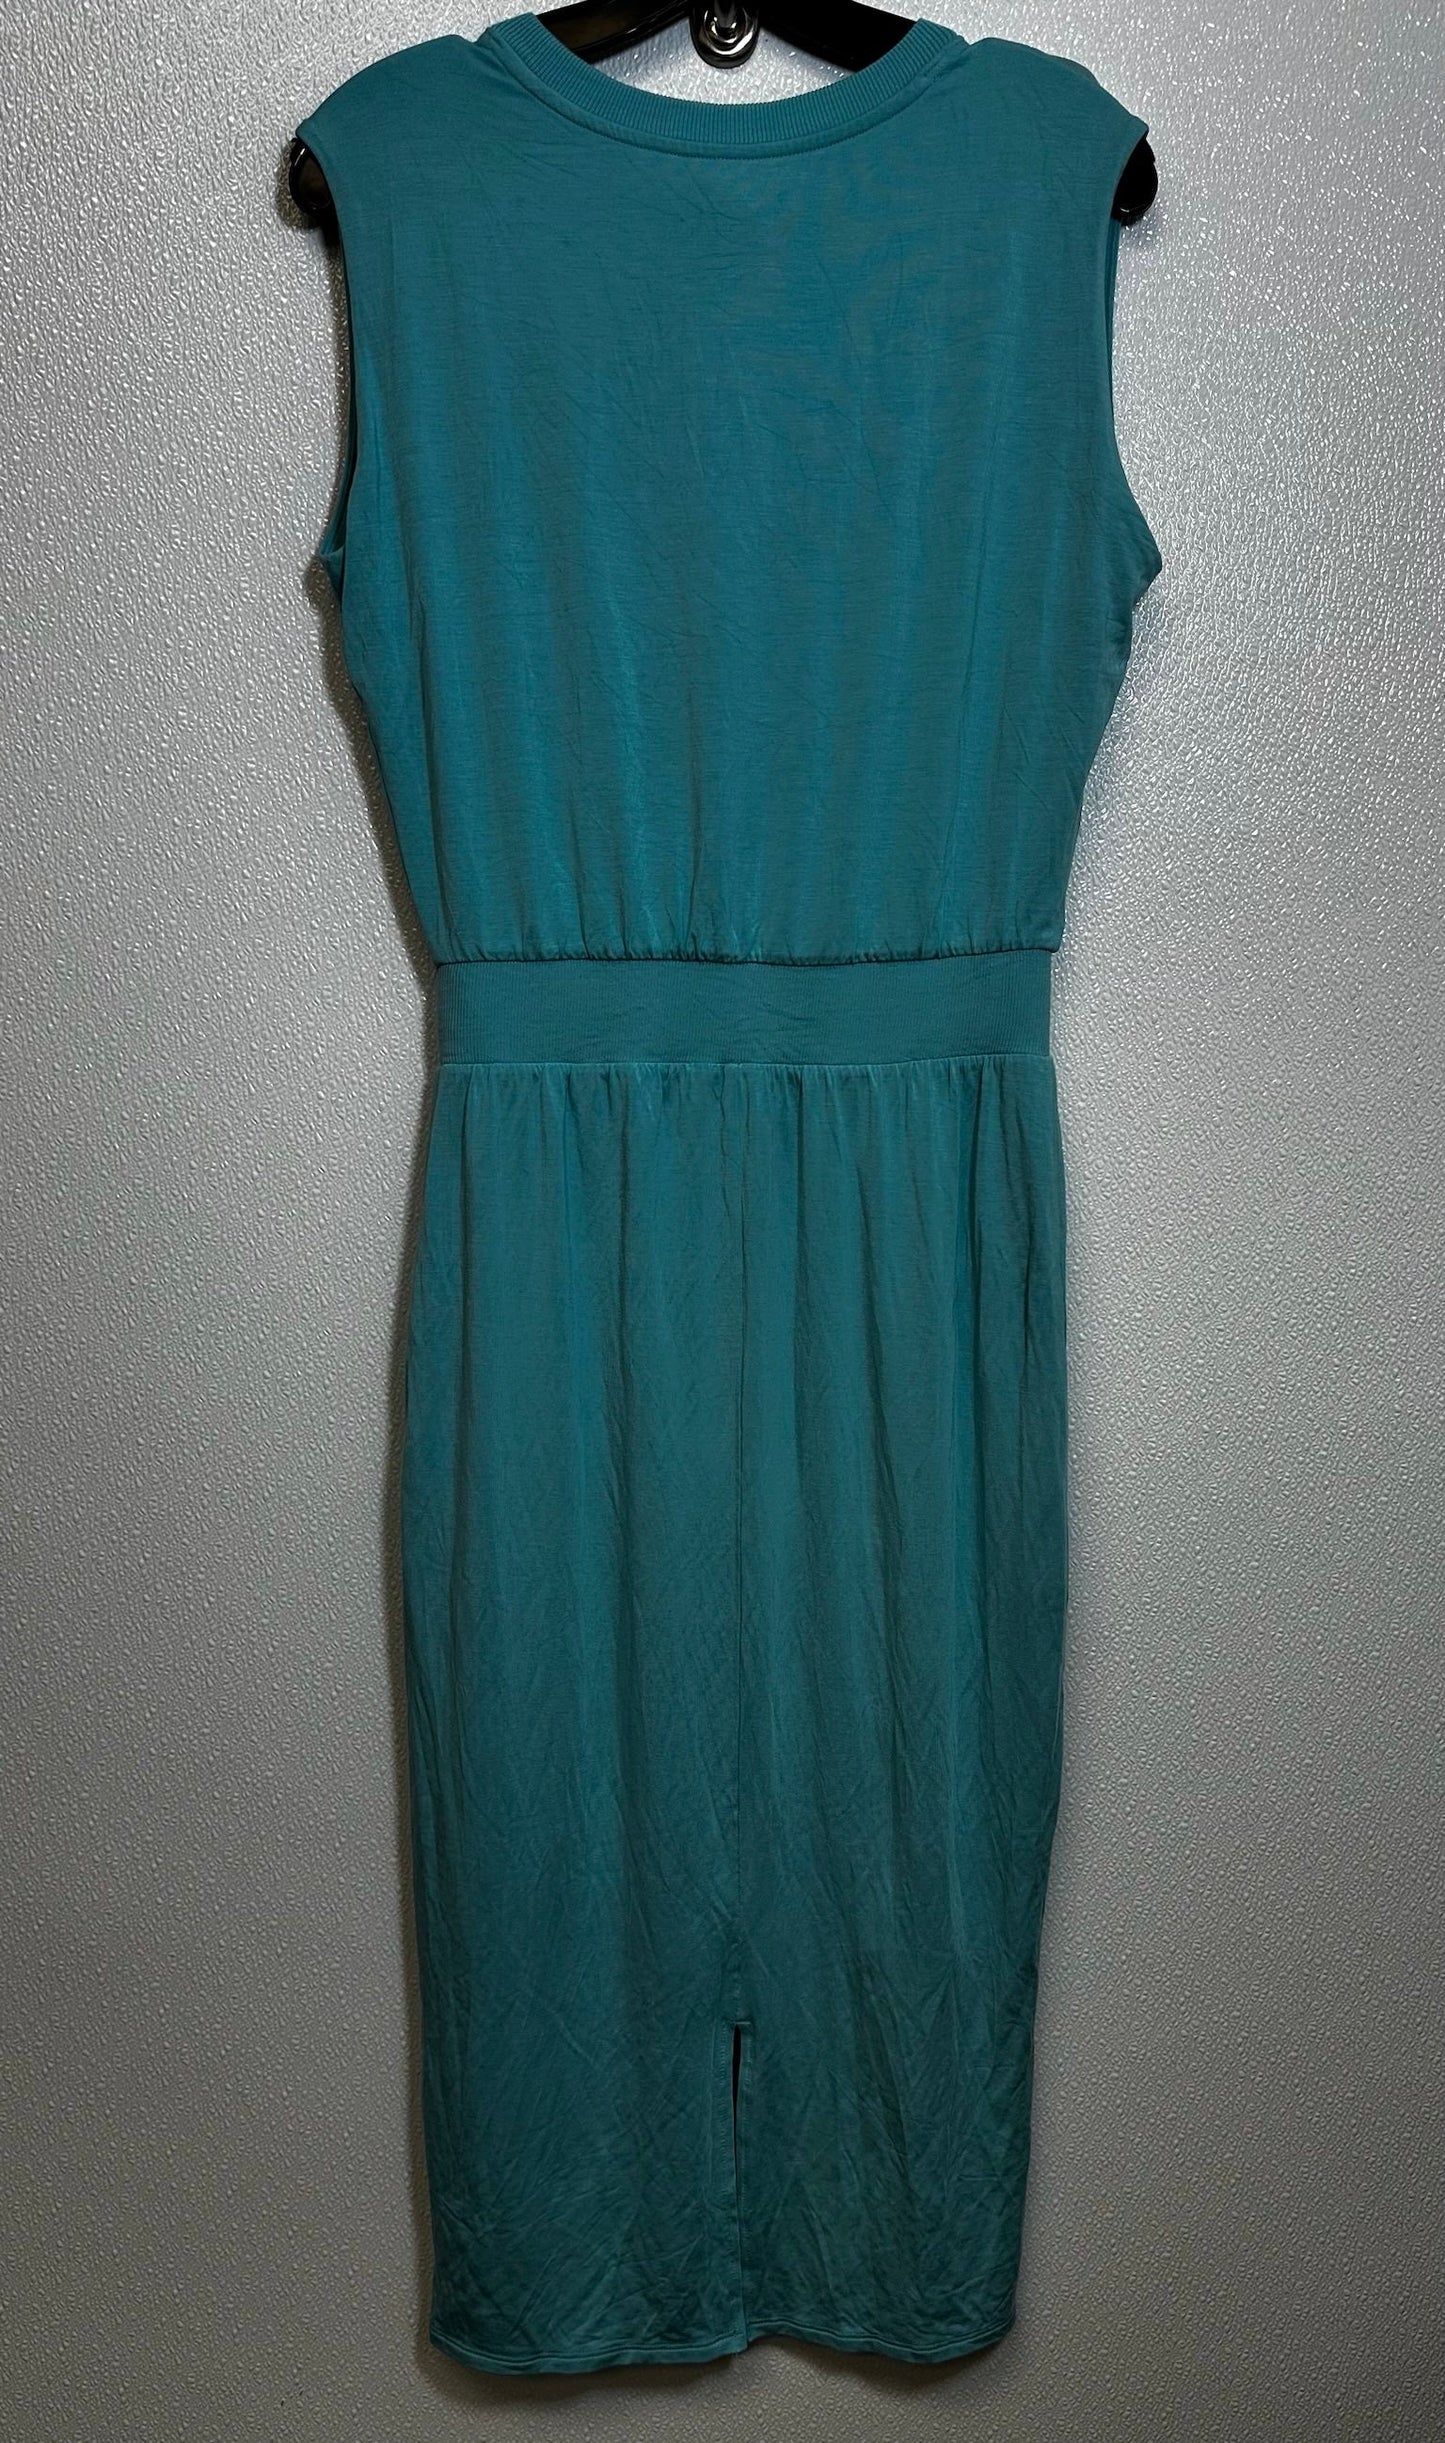 Dress Casual Short By Athleta  Size: Xs